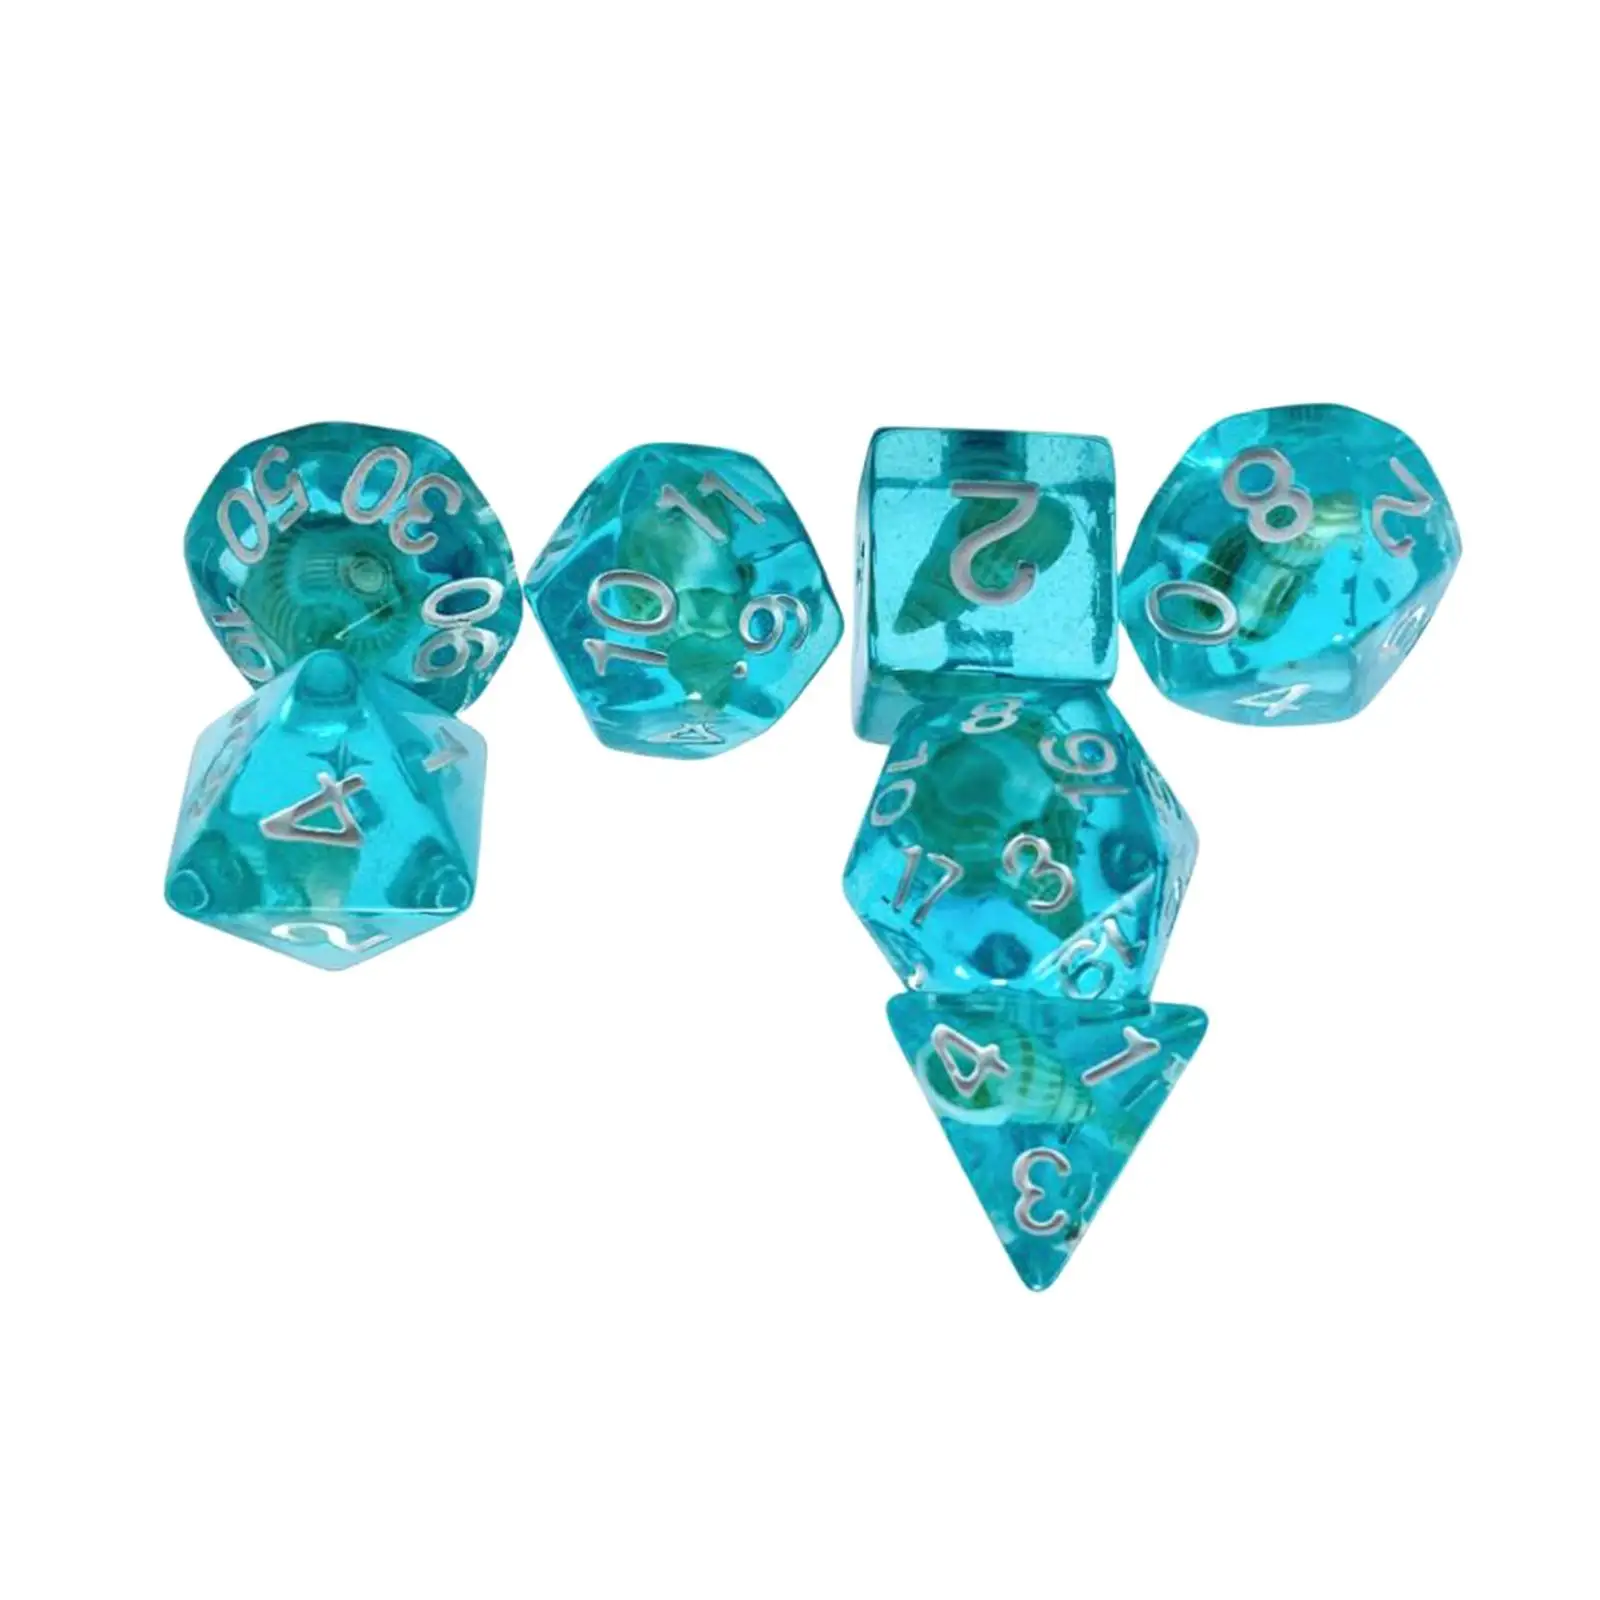 7x Polyhedral Dices Set Playing Dices D4-d20 Multi Sided Dices for Role Playing Game Board Game Card Party Game Card Games